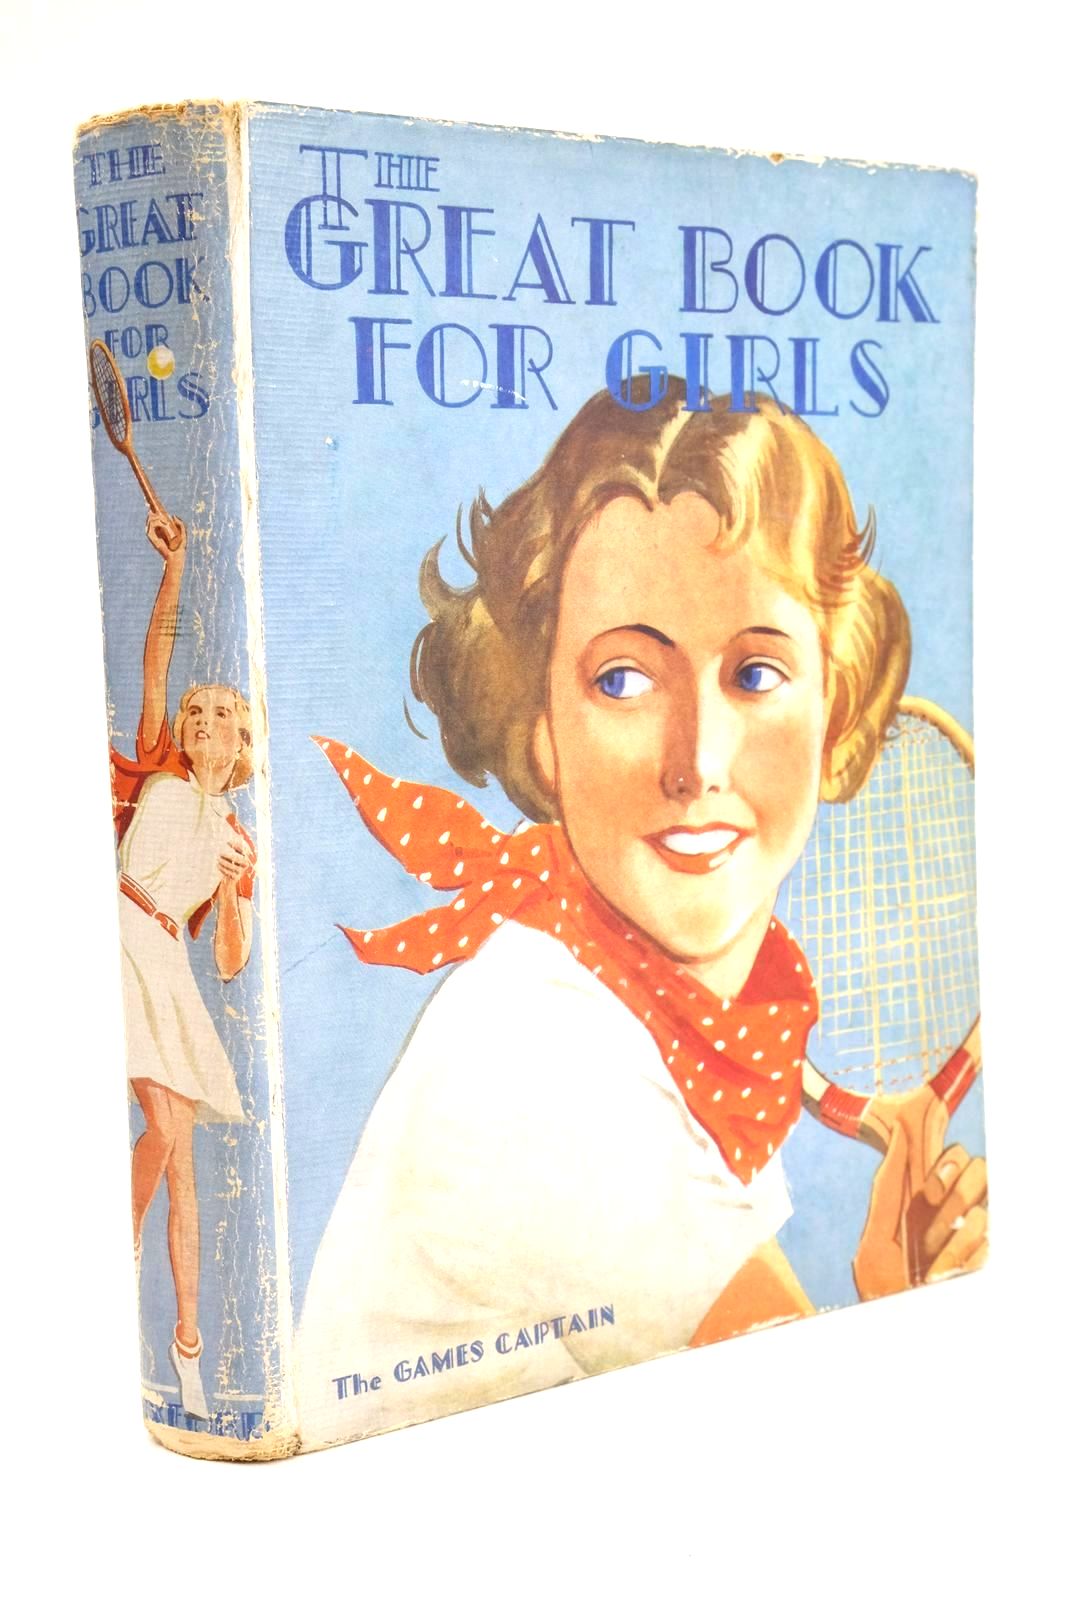 Photo of THE GREAT BOOK FOR GIRLS written by Strang, Mrs. Herbert
Francklyn, Phillippa
Darch, Winifred
Marchant, Bessie
et al, illustrated by Lodge, Grace
Reeve, Mary S.
Johnston, M.D.
et al., published by Oxford University Press, Humphrey Milford (STOCK CODE: 1324607)  for sale by Stella & Rose's Books